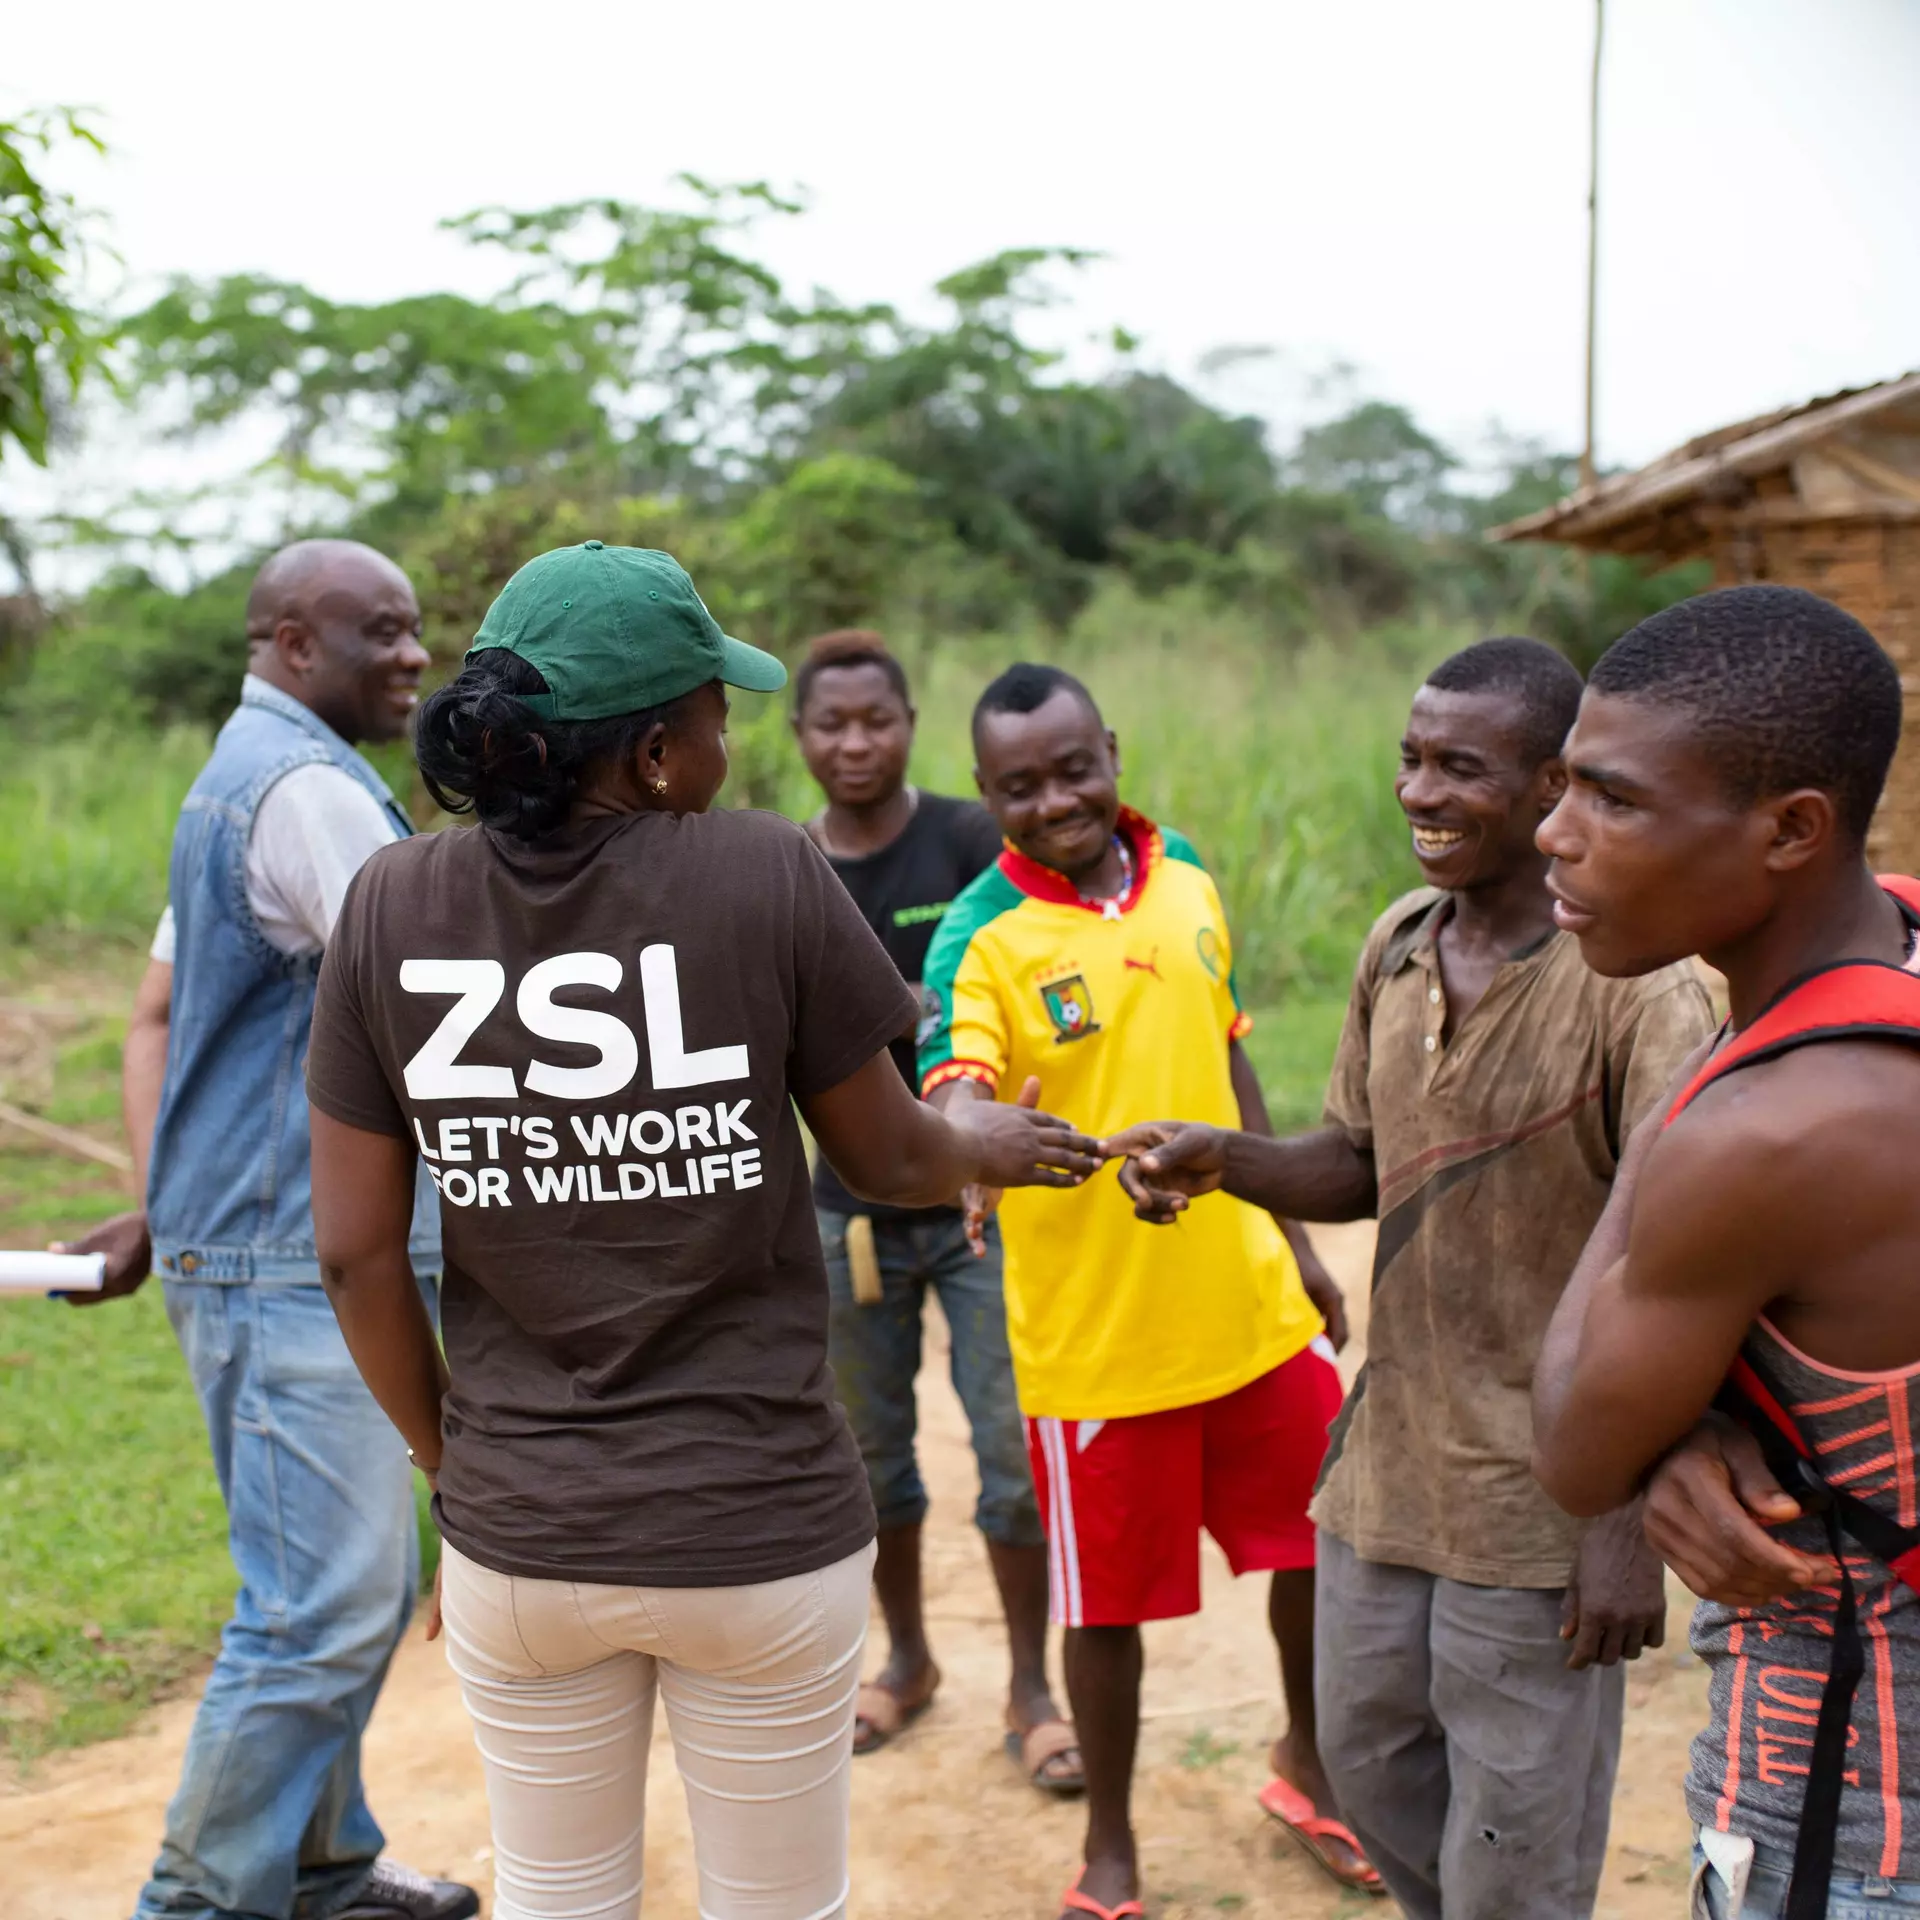 ZSL conservationist chatting with locals in Dja faunal reserve 